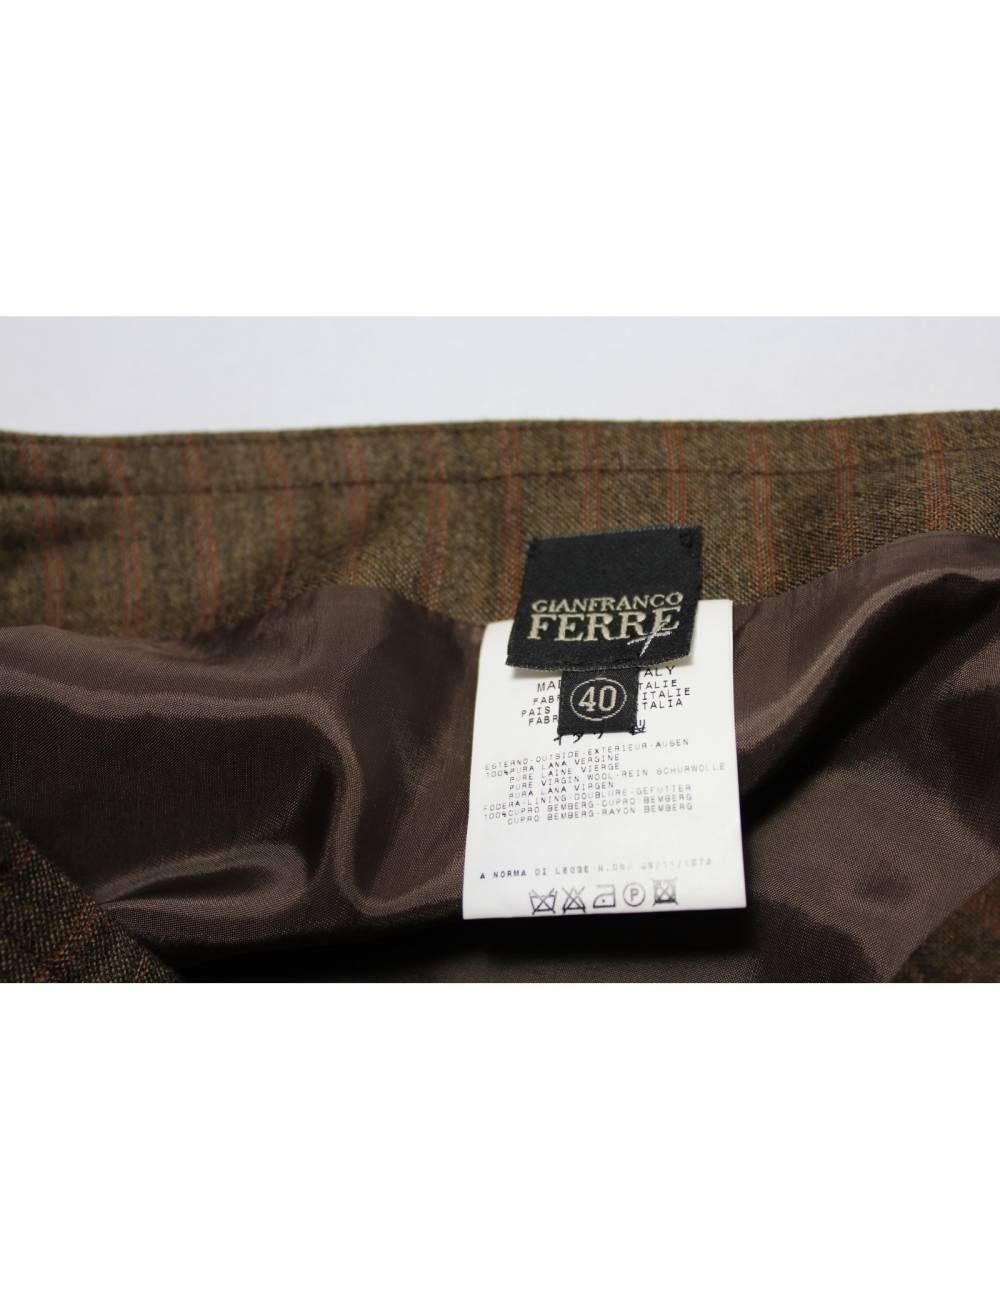 Vintage skirt by Italian designer Gianfranco Ferre, brown, 100% pure new wool.

Made in Italy skirt, sheath model is red and brown pinstripe.

Size 40 IT 6 US 8 UK

Waist: 40 cm
Length: 59 cm
